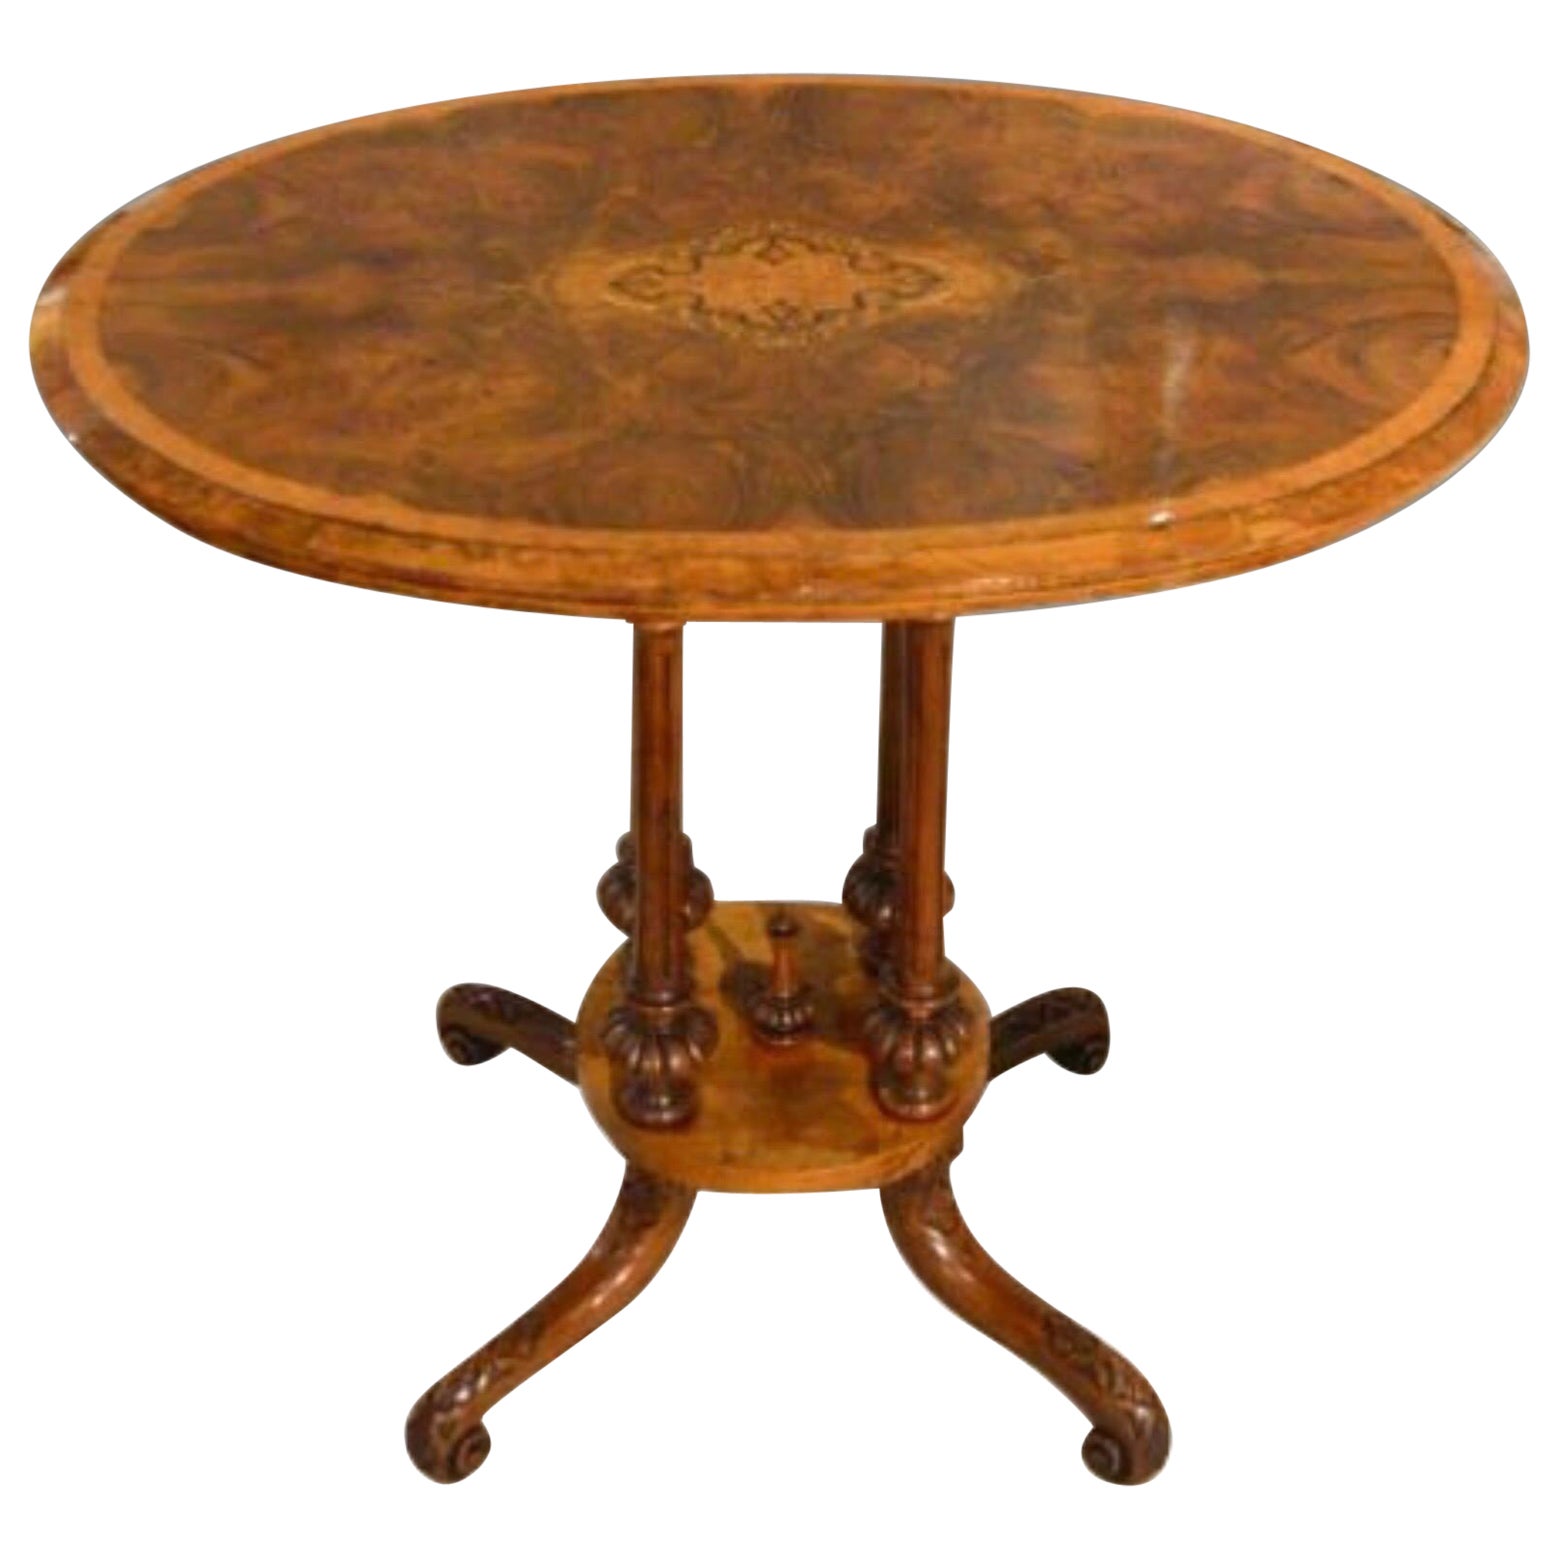 Stunning Antique Burr Walnut, Inlaid Victorian Oval Occasionall Lamp Table For Sale